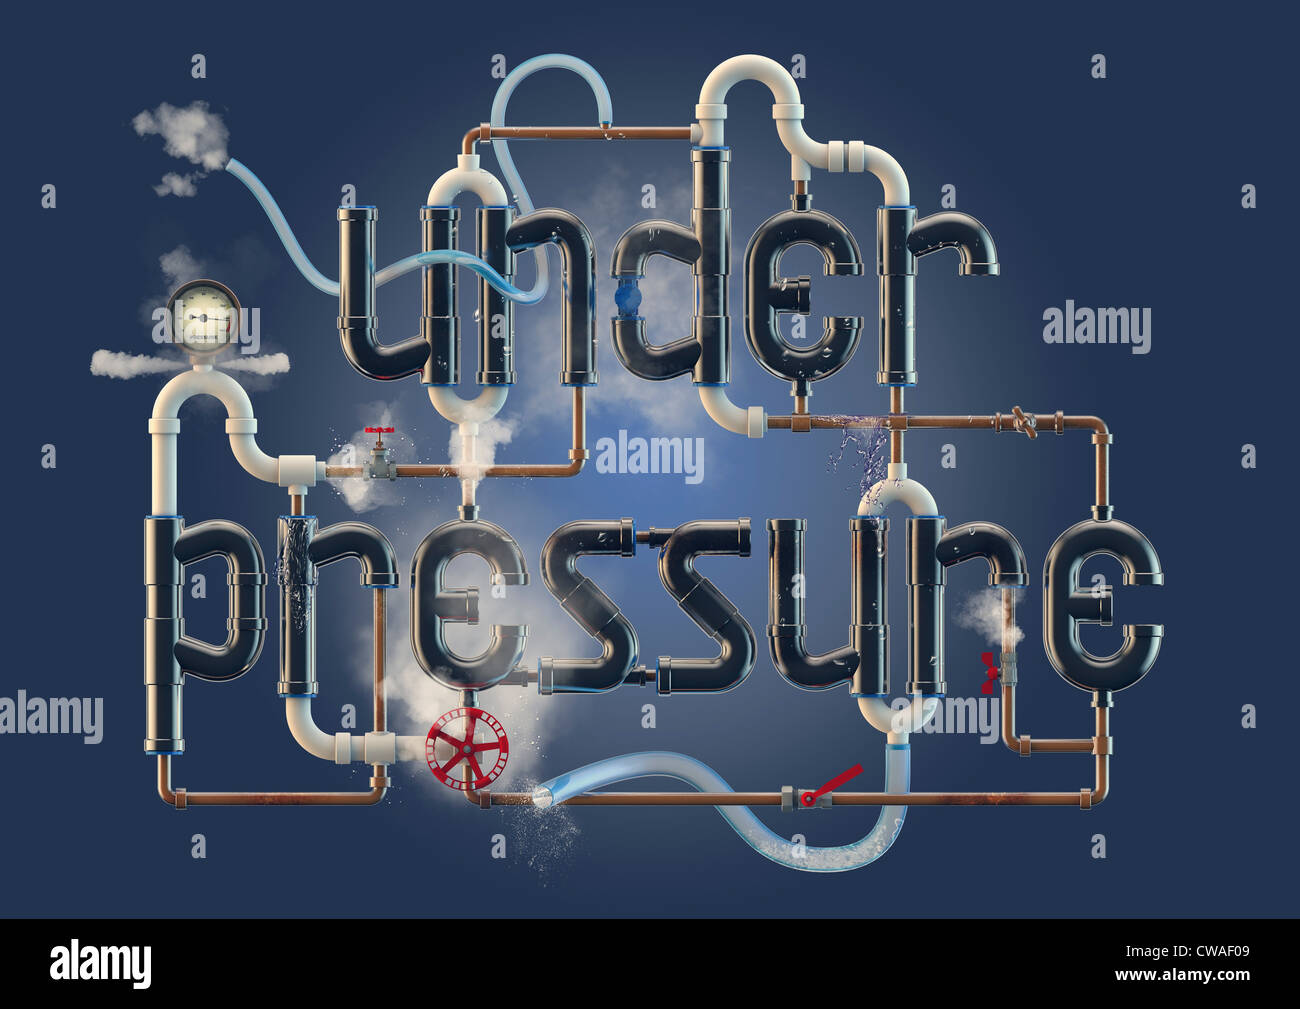 Under Pressure - word illustration formed from pipes Stock Photo